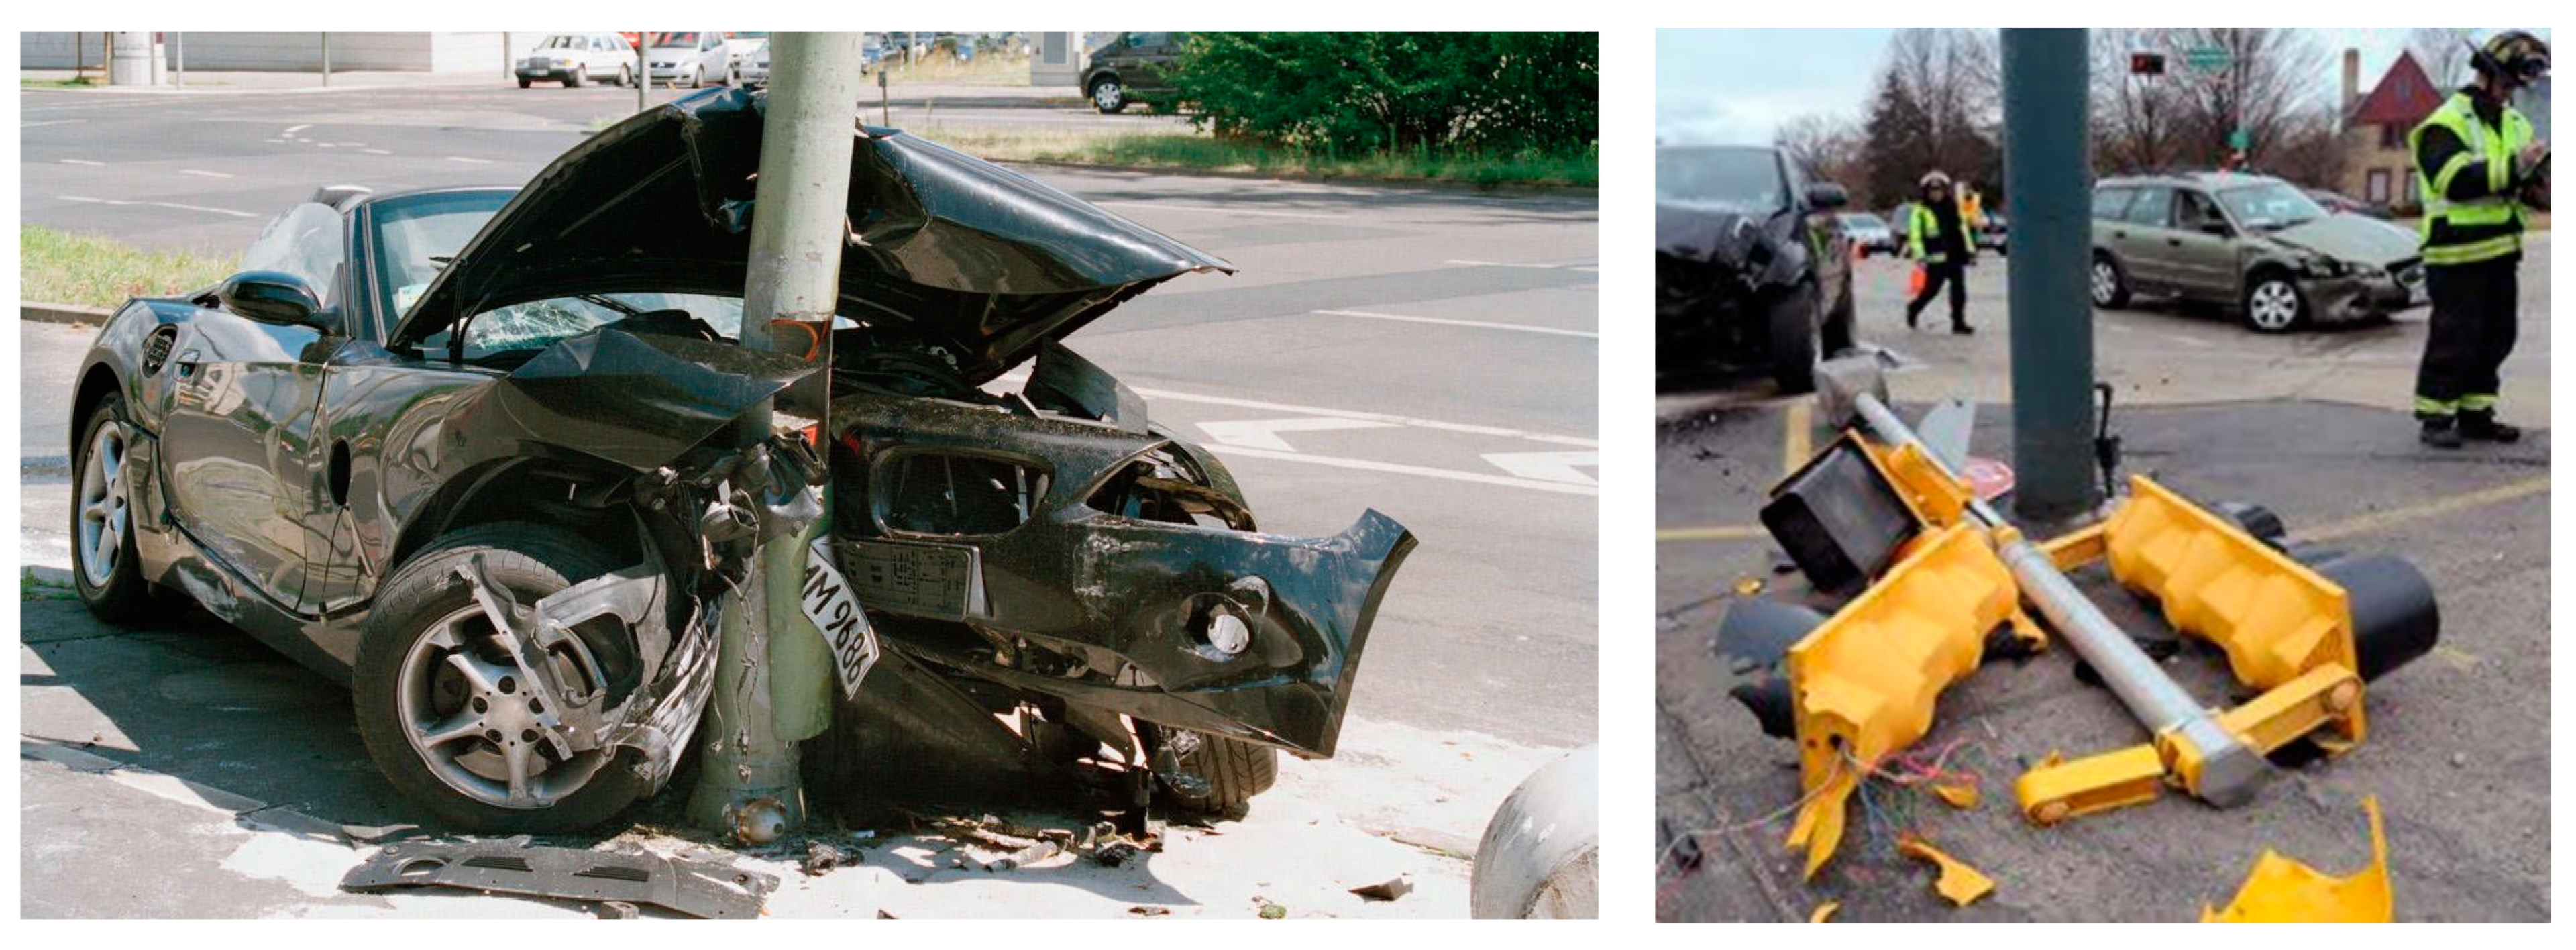 How to Tell if a Car is “Crashworthy”